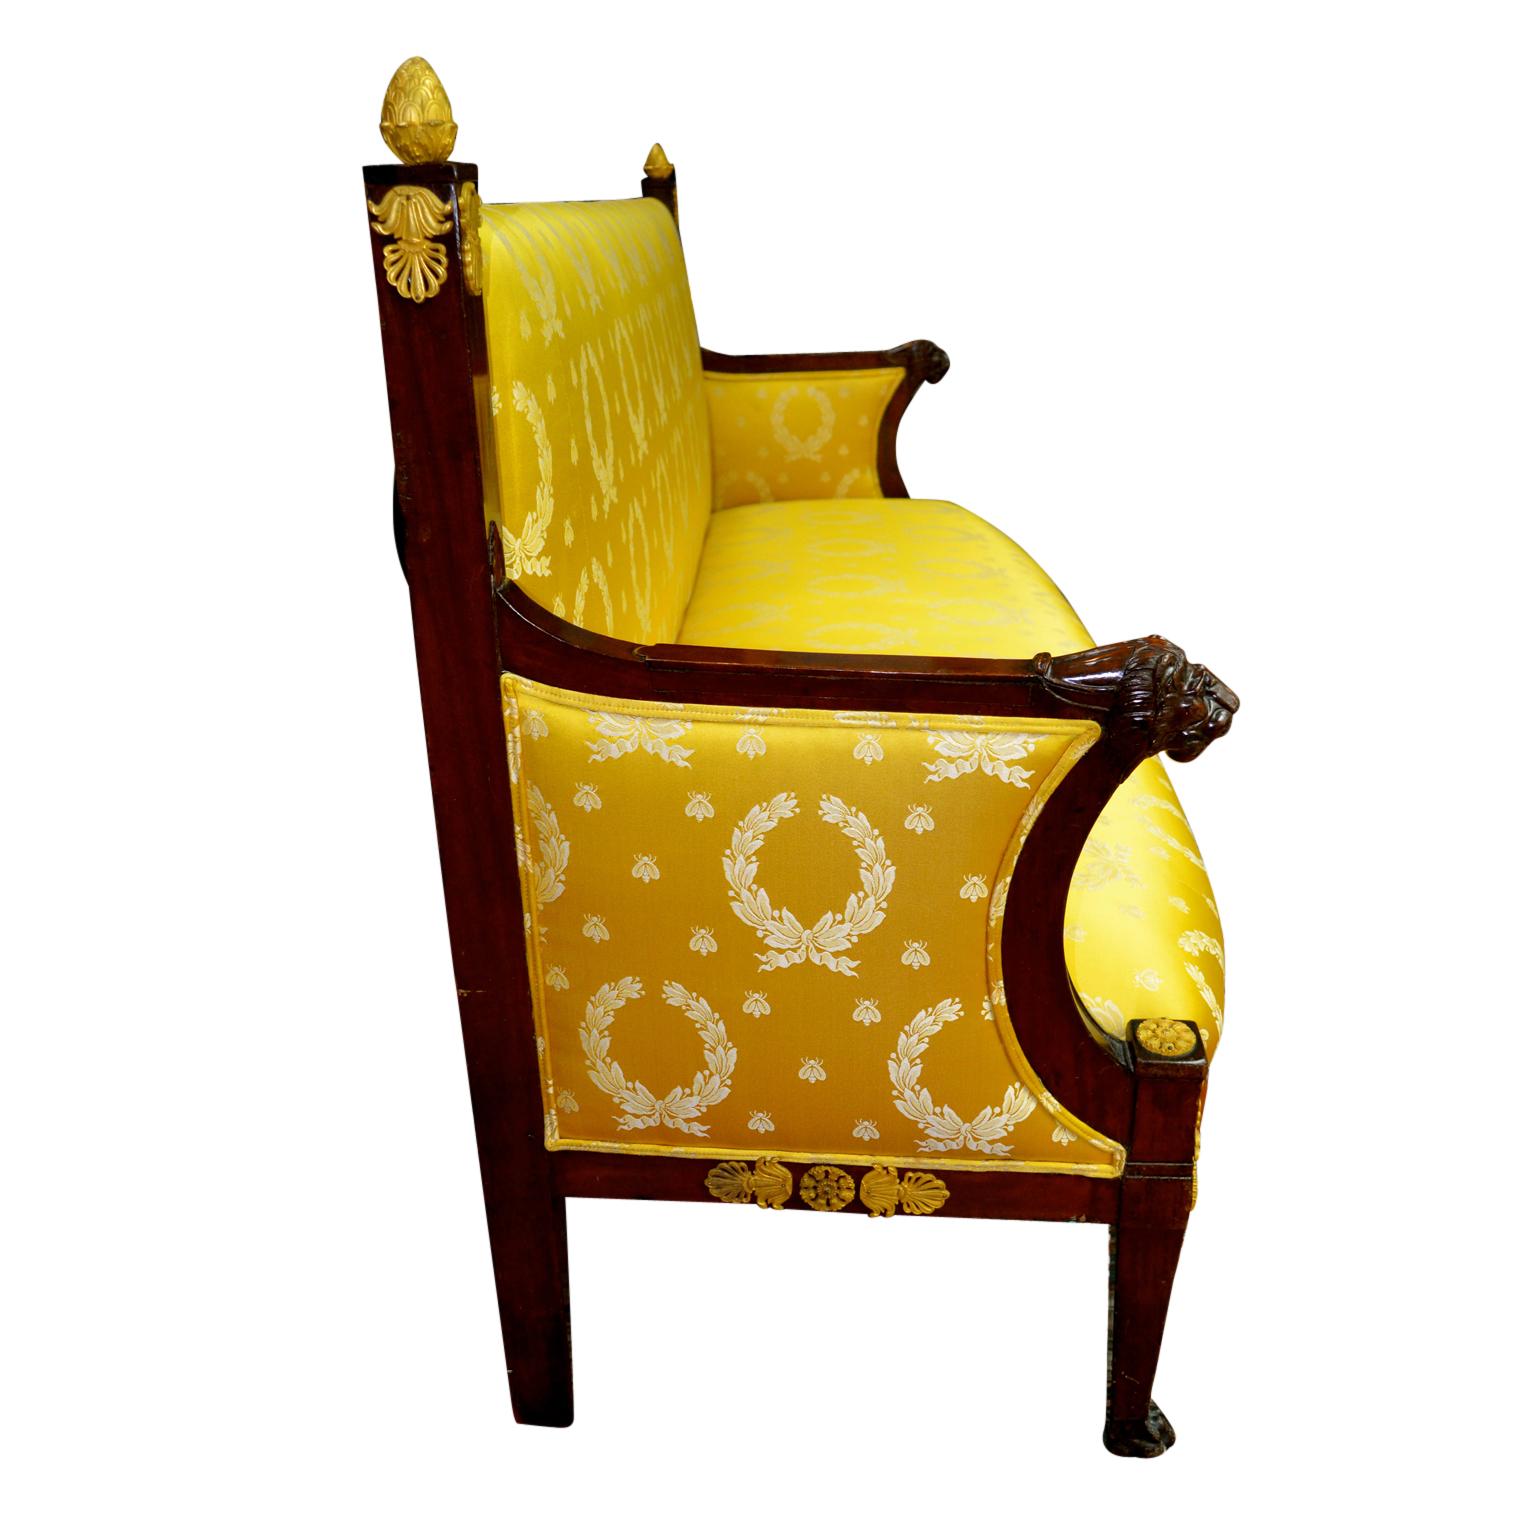 Period French Directoire Mahogany Cannape in Gold Empire Silk Fabric In Good Condition For Sale In Vancouver, British Columbia